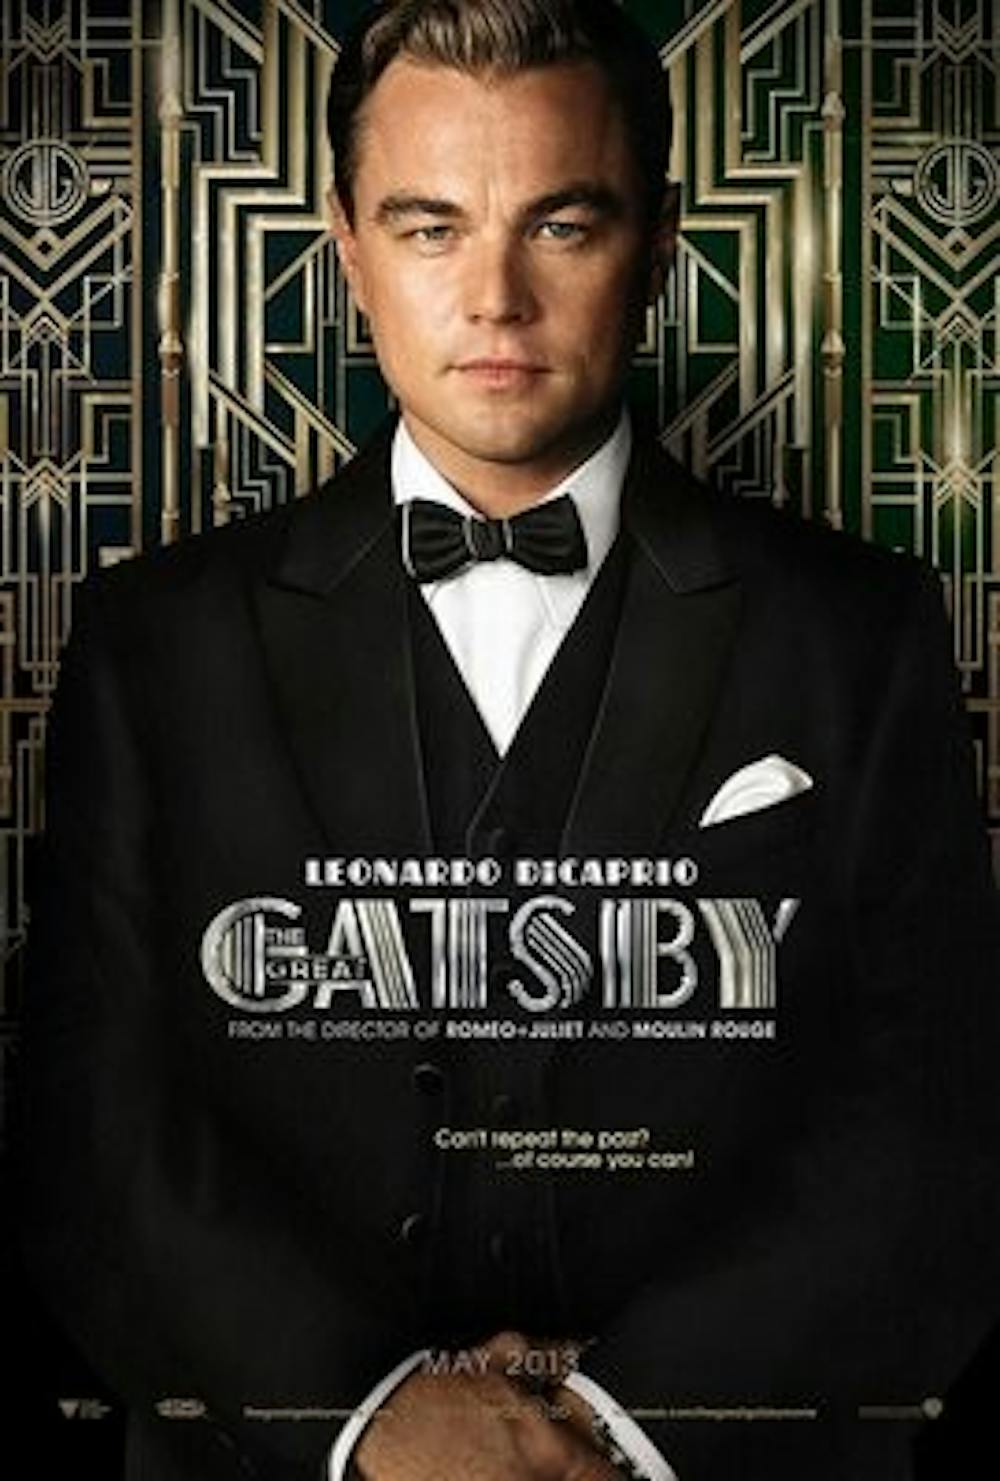 "The Great Gatsby" film adaptation was met with mixed reviews this summer.